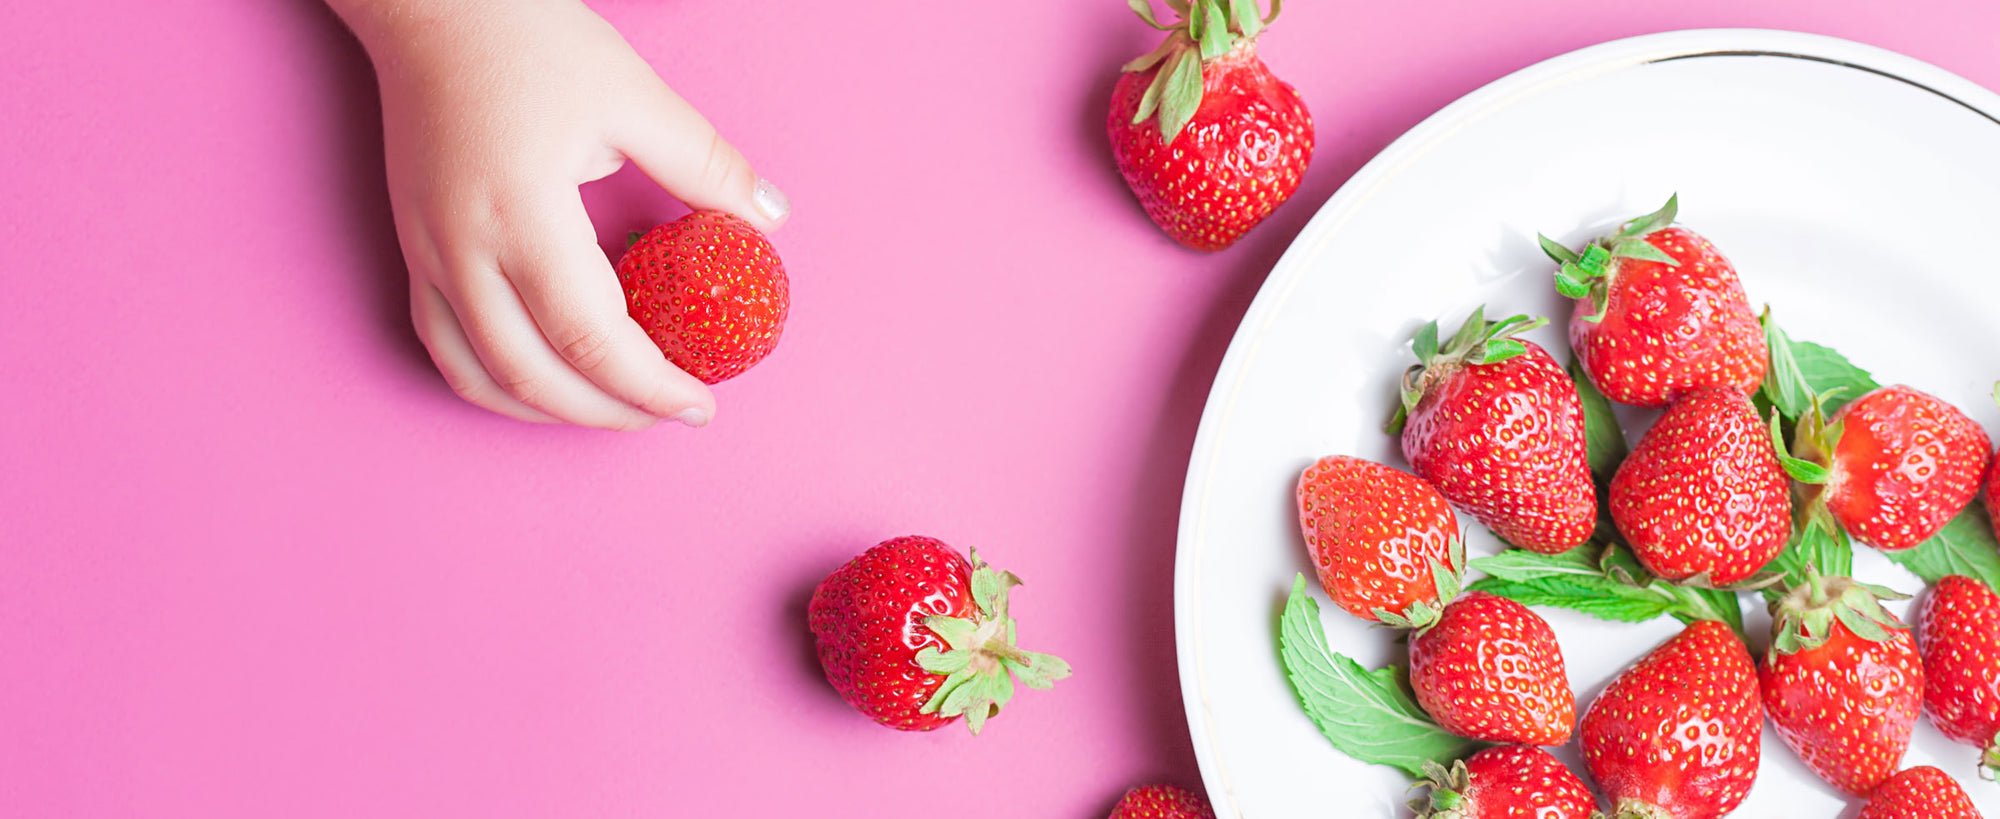 An image of the fresh strawberries used in ZOKU's Homemade Ice Cream recipe